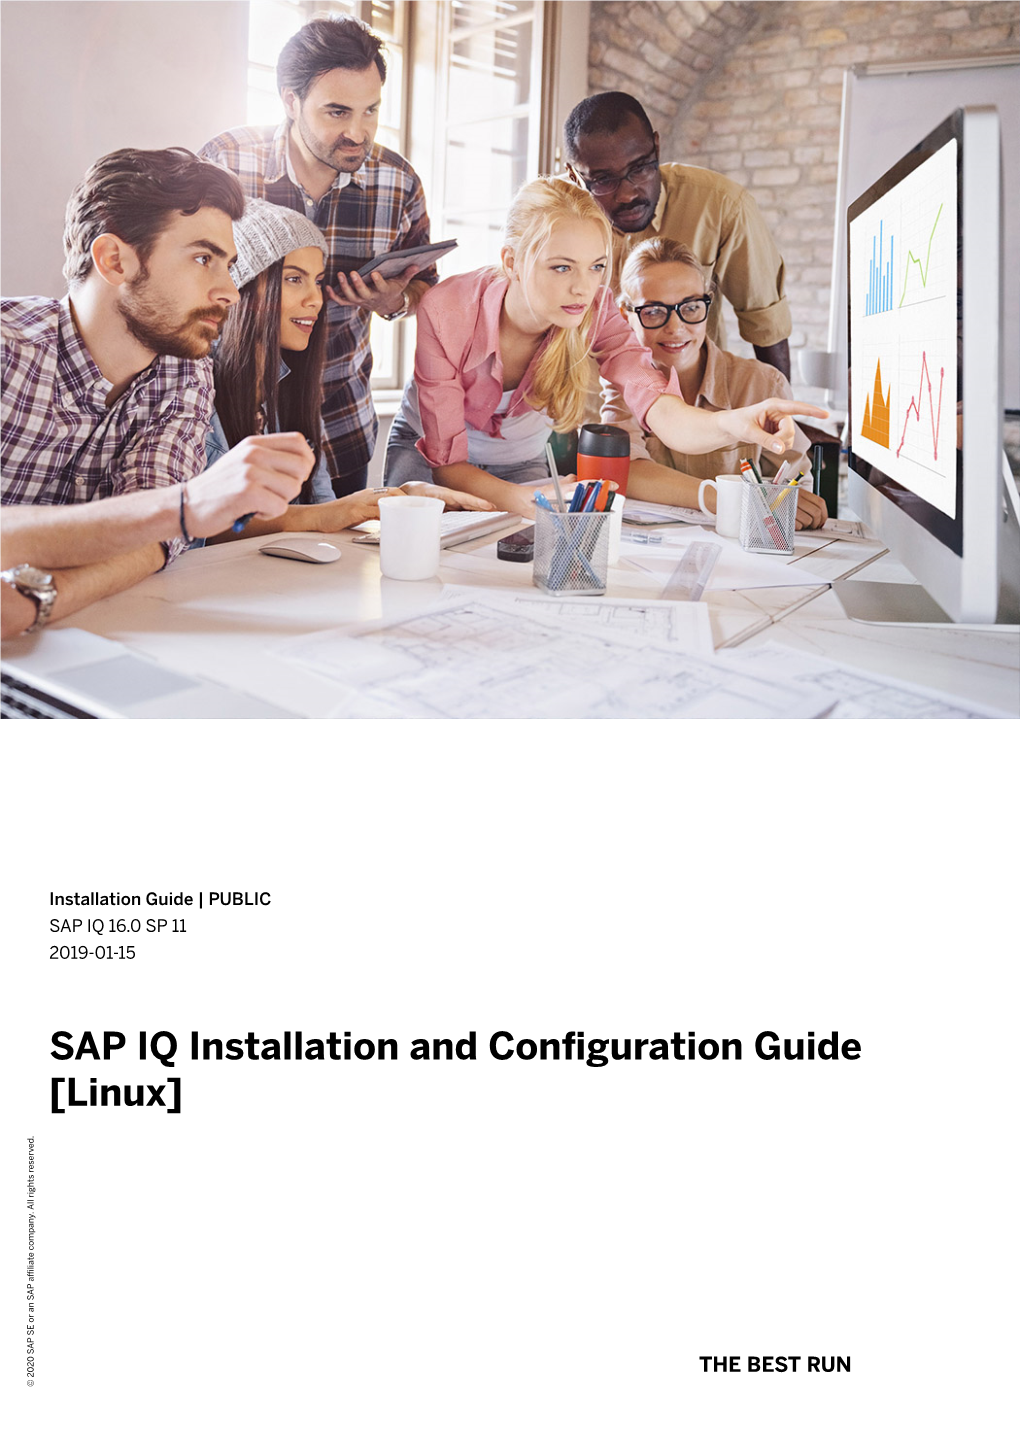 SAP IQ Installation and Configuration Guide [Linux] Company